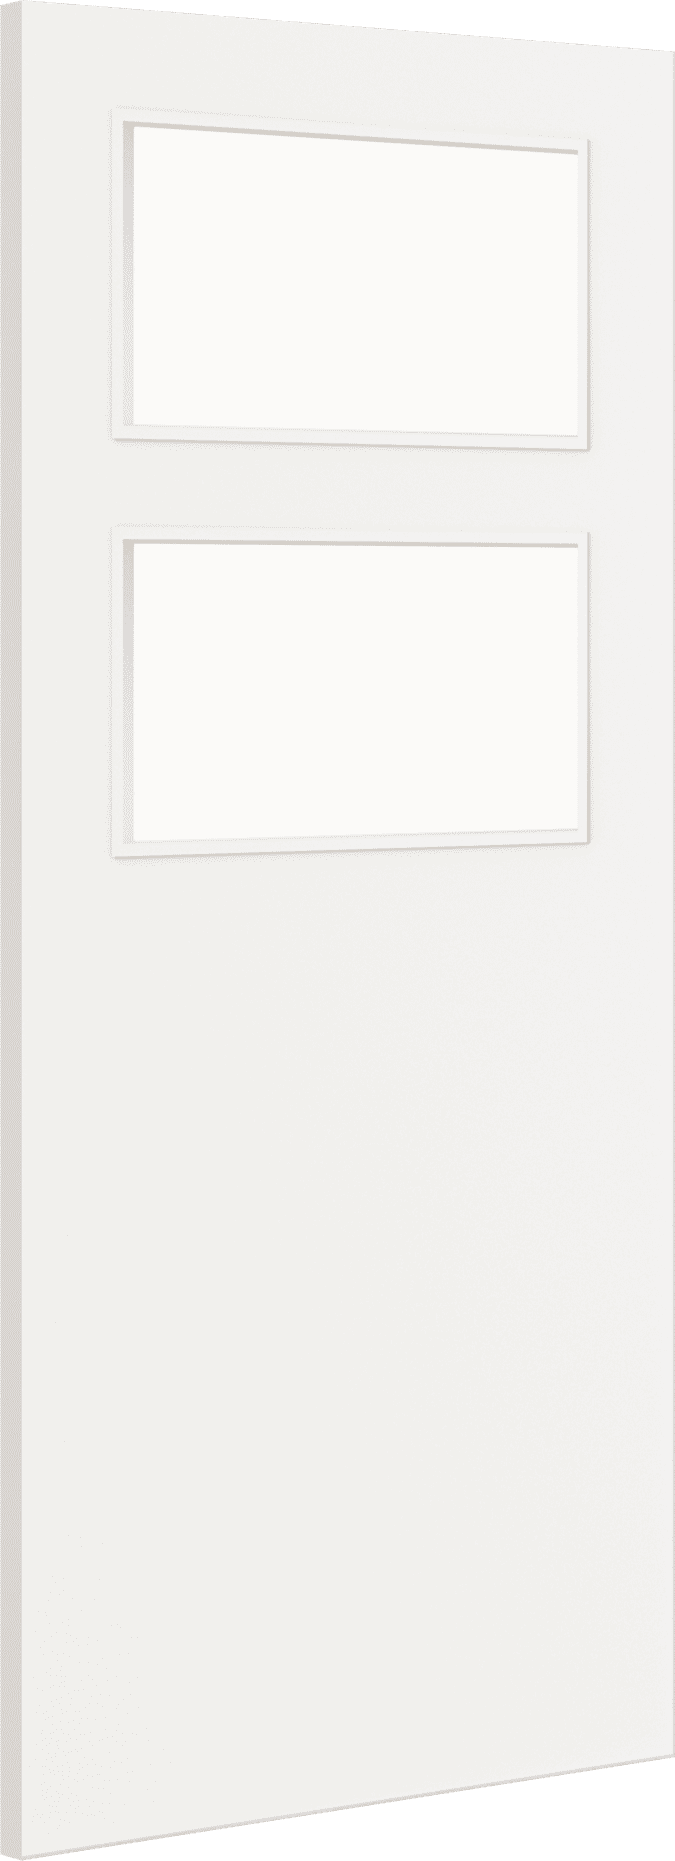 2040mm x 626mm x 44mm Architectural Paint Grade White 02 Clear Glazed Fire Door Blank